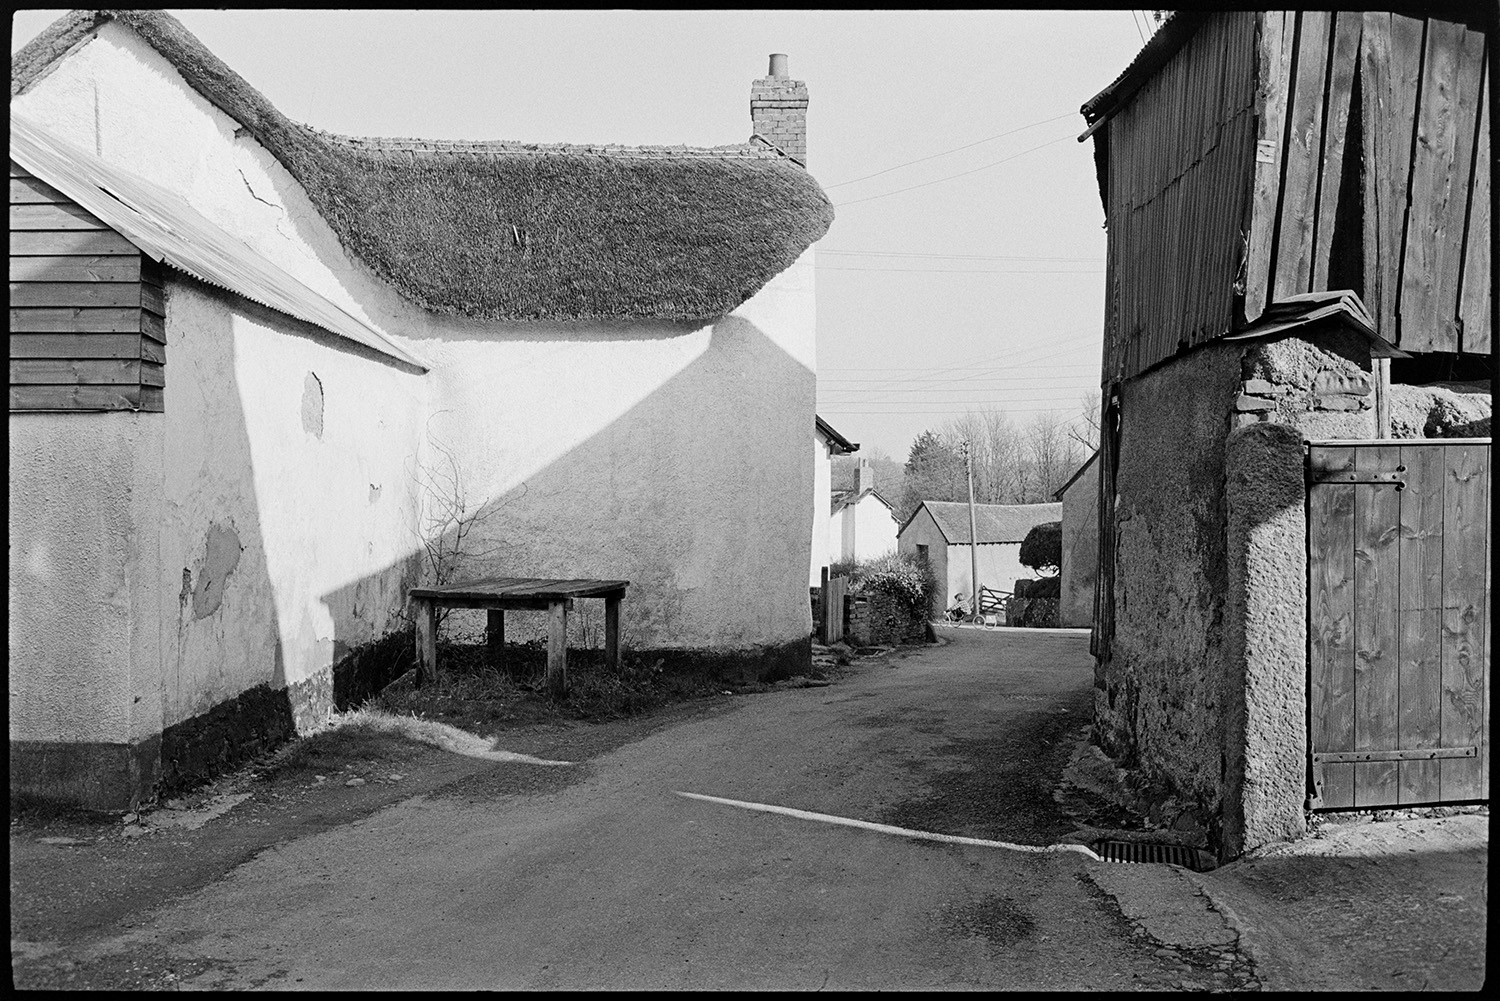 Street scenes, washing on line. 
[A street in Kings Nympton with a cob and thatch cottage and a wooden barn. A wooden stand, possibly a milk churn stand is by the cottage.]